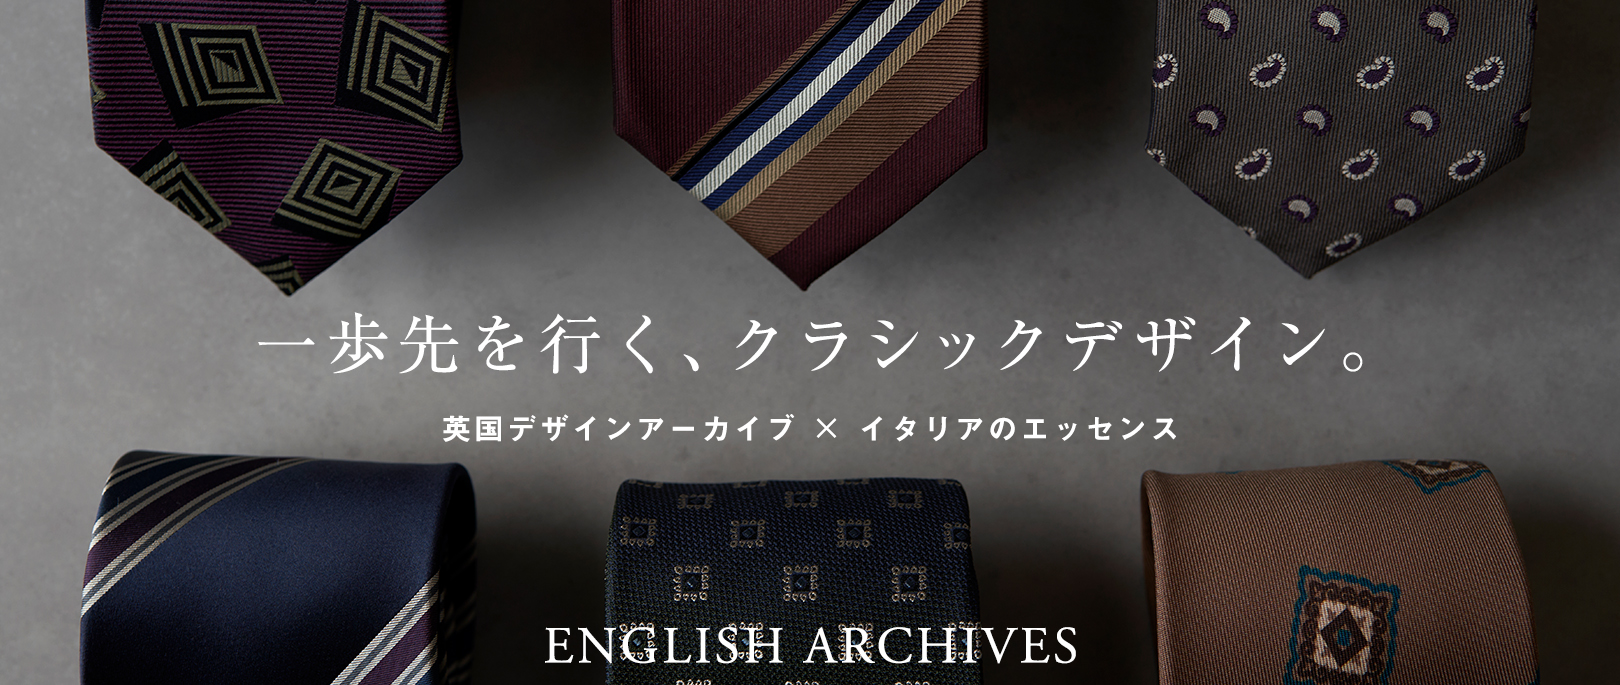 English Archives